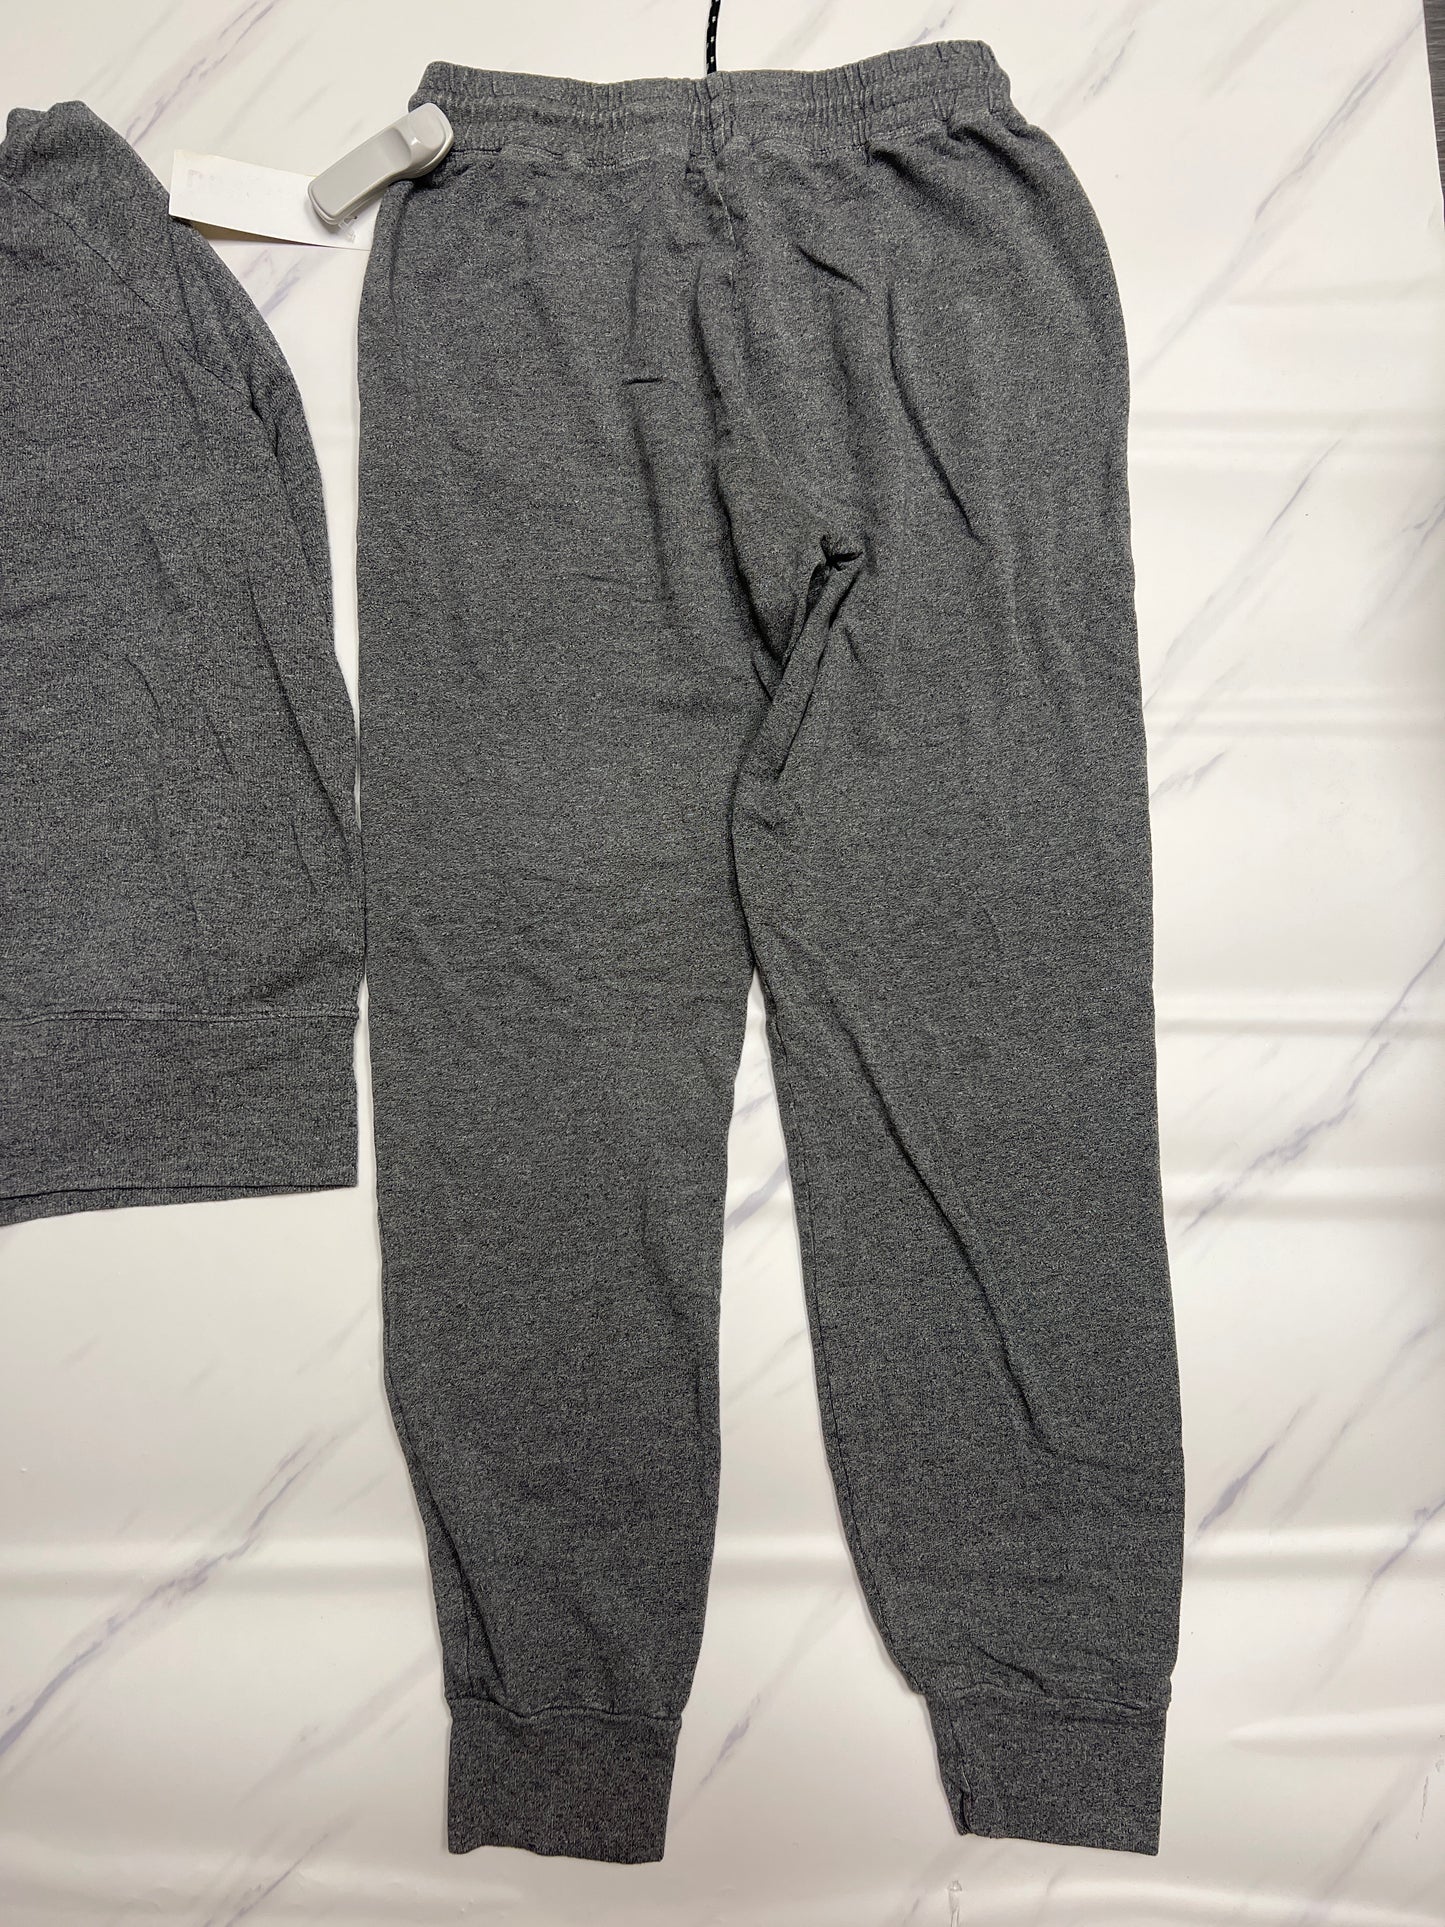 Athletic Pants 2pc By Sundry  Size: S